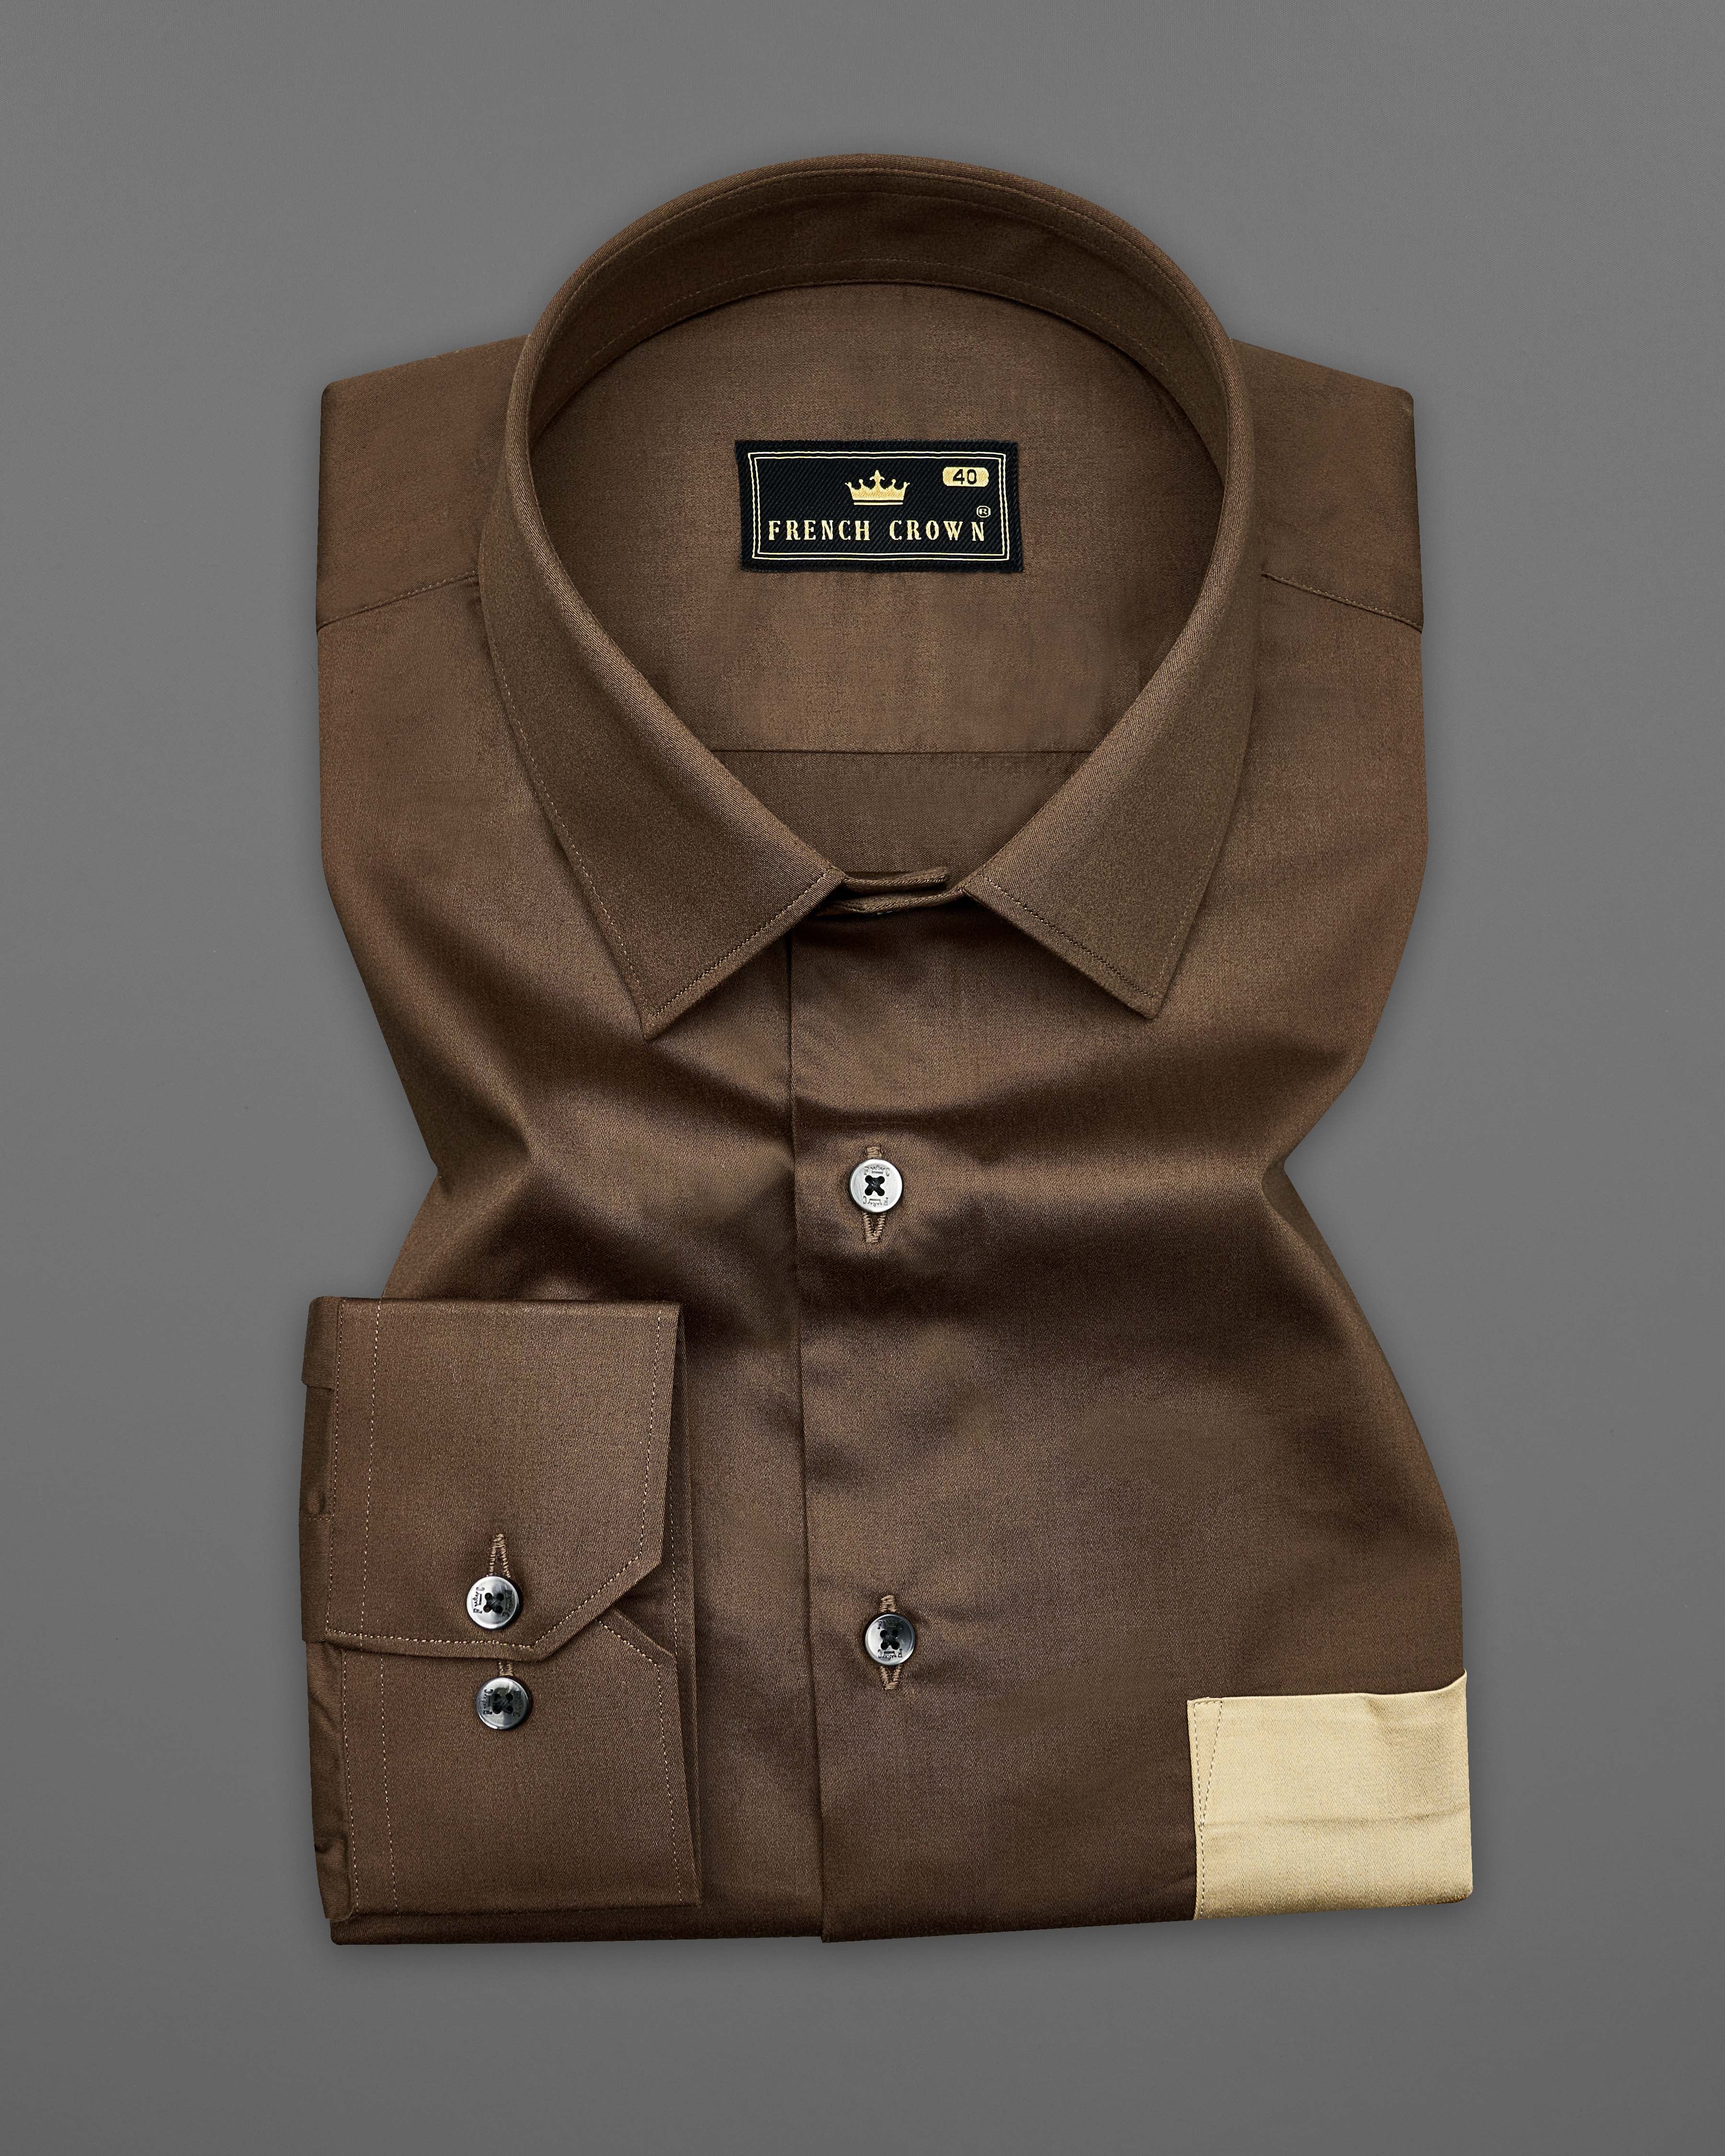 Millbrook Brown with Patch Subtle Sheen Pocket and Bicycle Super Soft Premium Cotton Shirt 9020-BLK-E033-38, 9020-BLK-E033-H-38, 9020-BLK-E033-39, 9020-BLK-E033-H-39, 9020-BLK-E033-40, 9020-BLK-E033-H-40, 9020-BLK-E033-42, 9020-BLK-E033-H-42, 9020-BLK-E033-44, 9020-BLK-E033-H-44, 9020-BLK-E033-46, 9020-BLK-E033-H-46, 9020-BLK-E033-48, 9020-BLK-E033-H-48, 9020-BLK-E033-50, 9020-BLK-E033-H-50, 9020-BLK-E033-52, 9020-BLK-E033-H-52